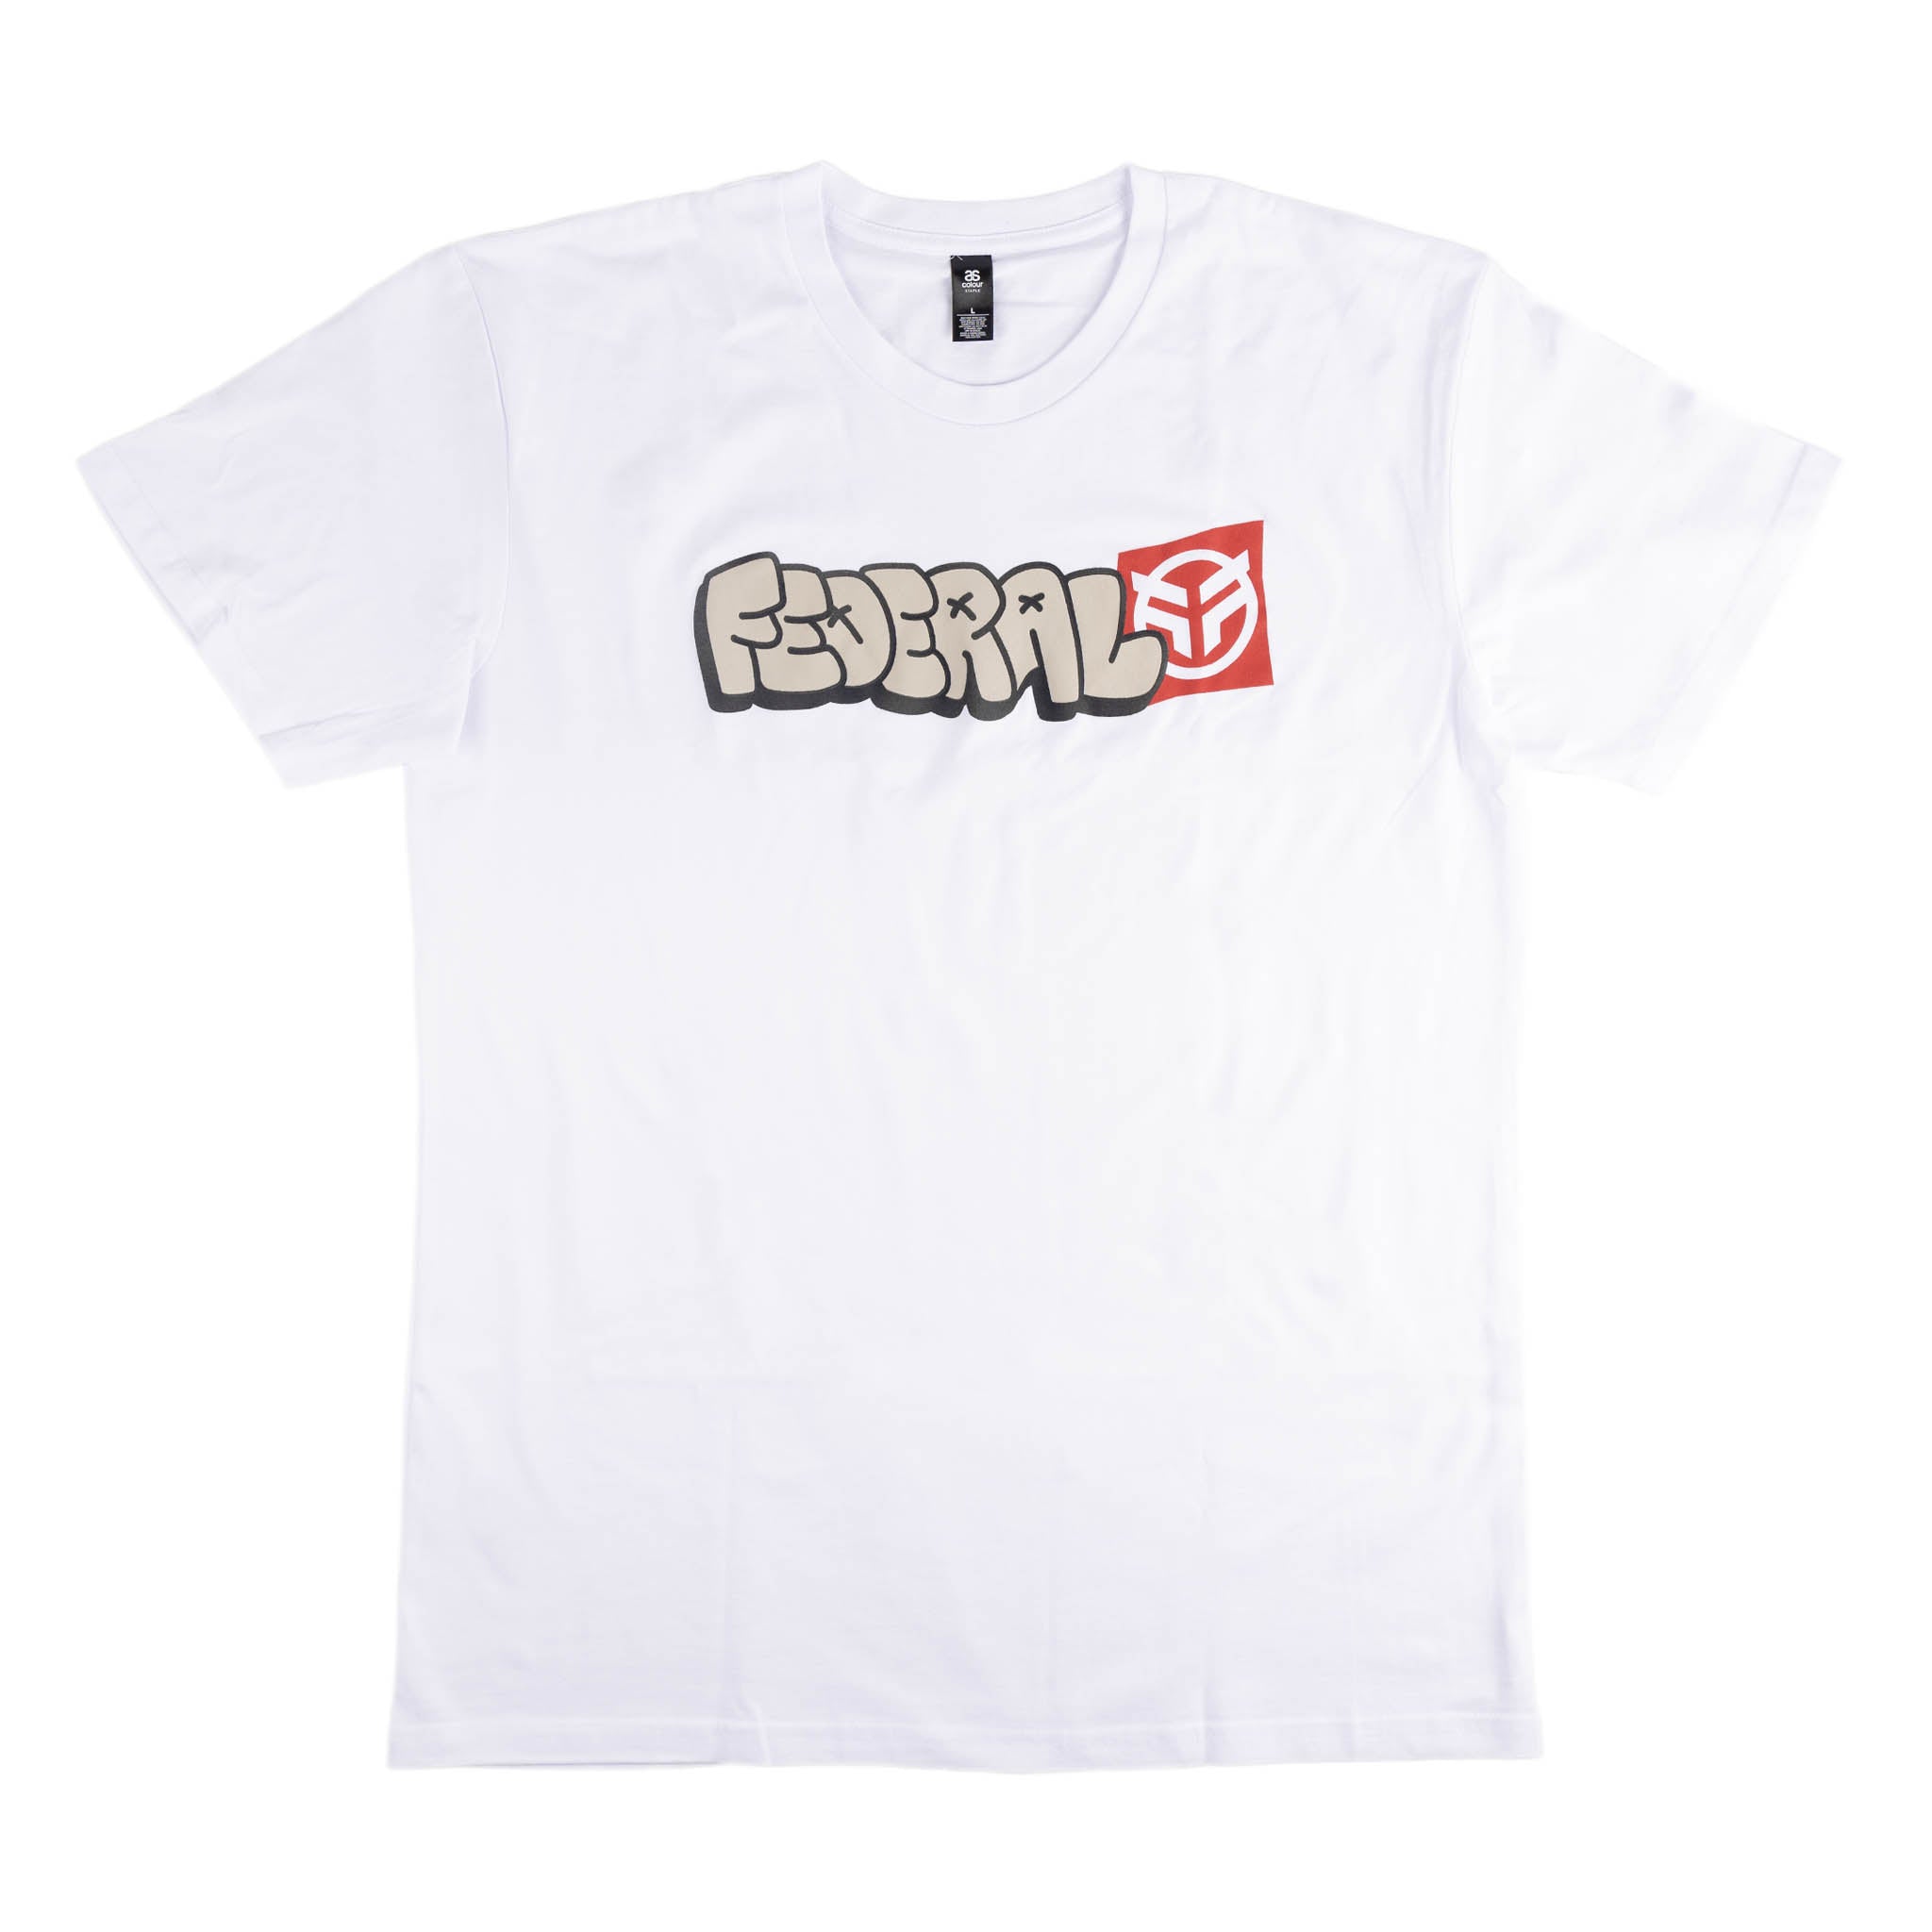 Federal Tagged T-Shirt - White Front | Backyard UK BMX Shop Hastings